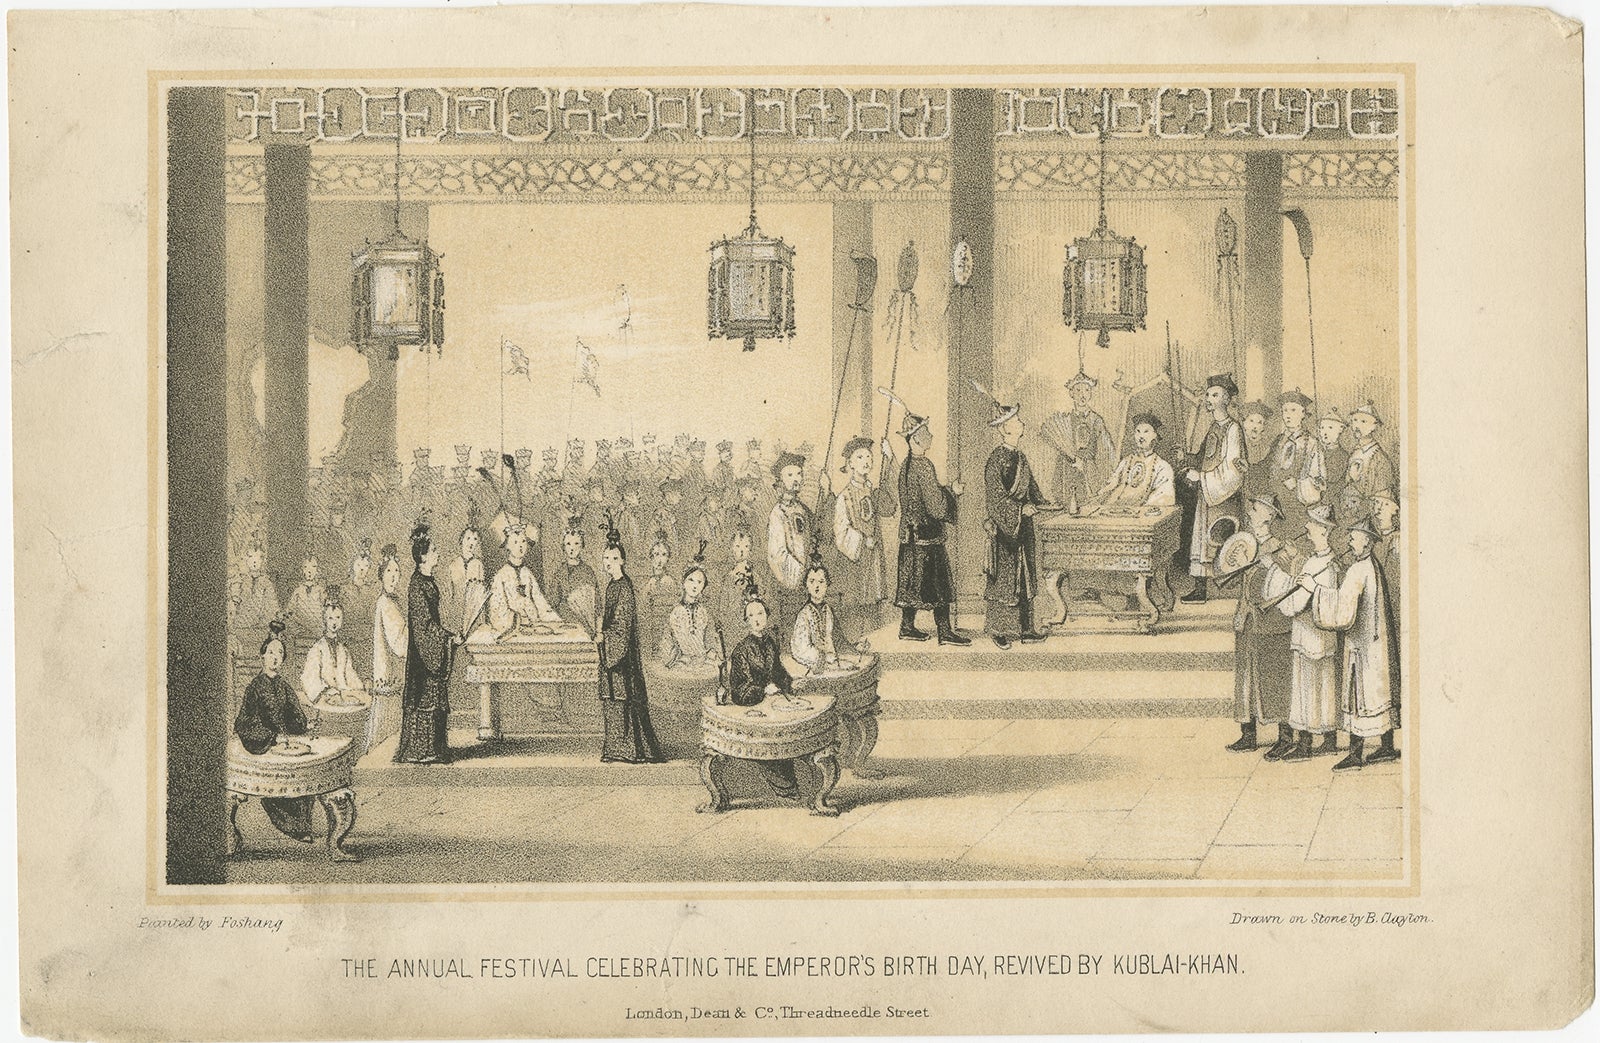 Antique print titled 'The Annual Festival celebrating the Emperor's birthday, revived by Kublai-Khan'. Lithograph of the festival celebrating the Emperor's birthday, China. This print originates from 'The History of China & India, Pictorial &